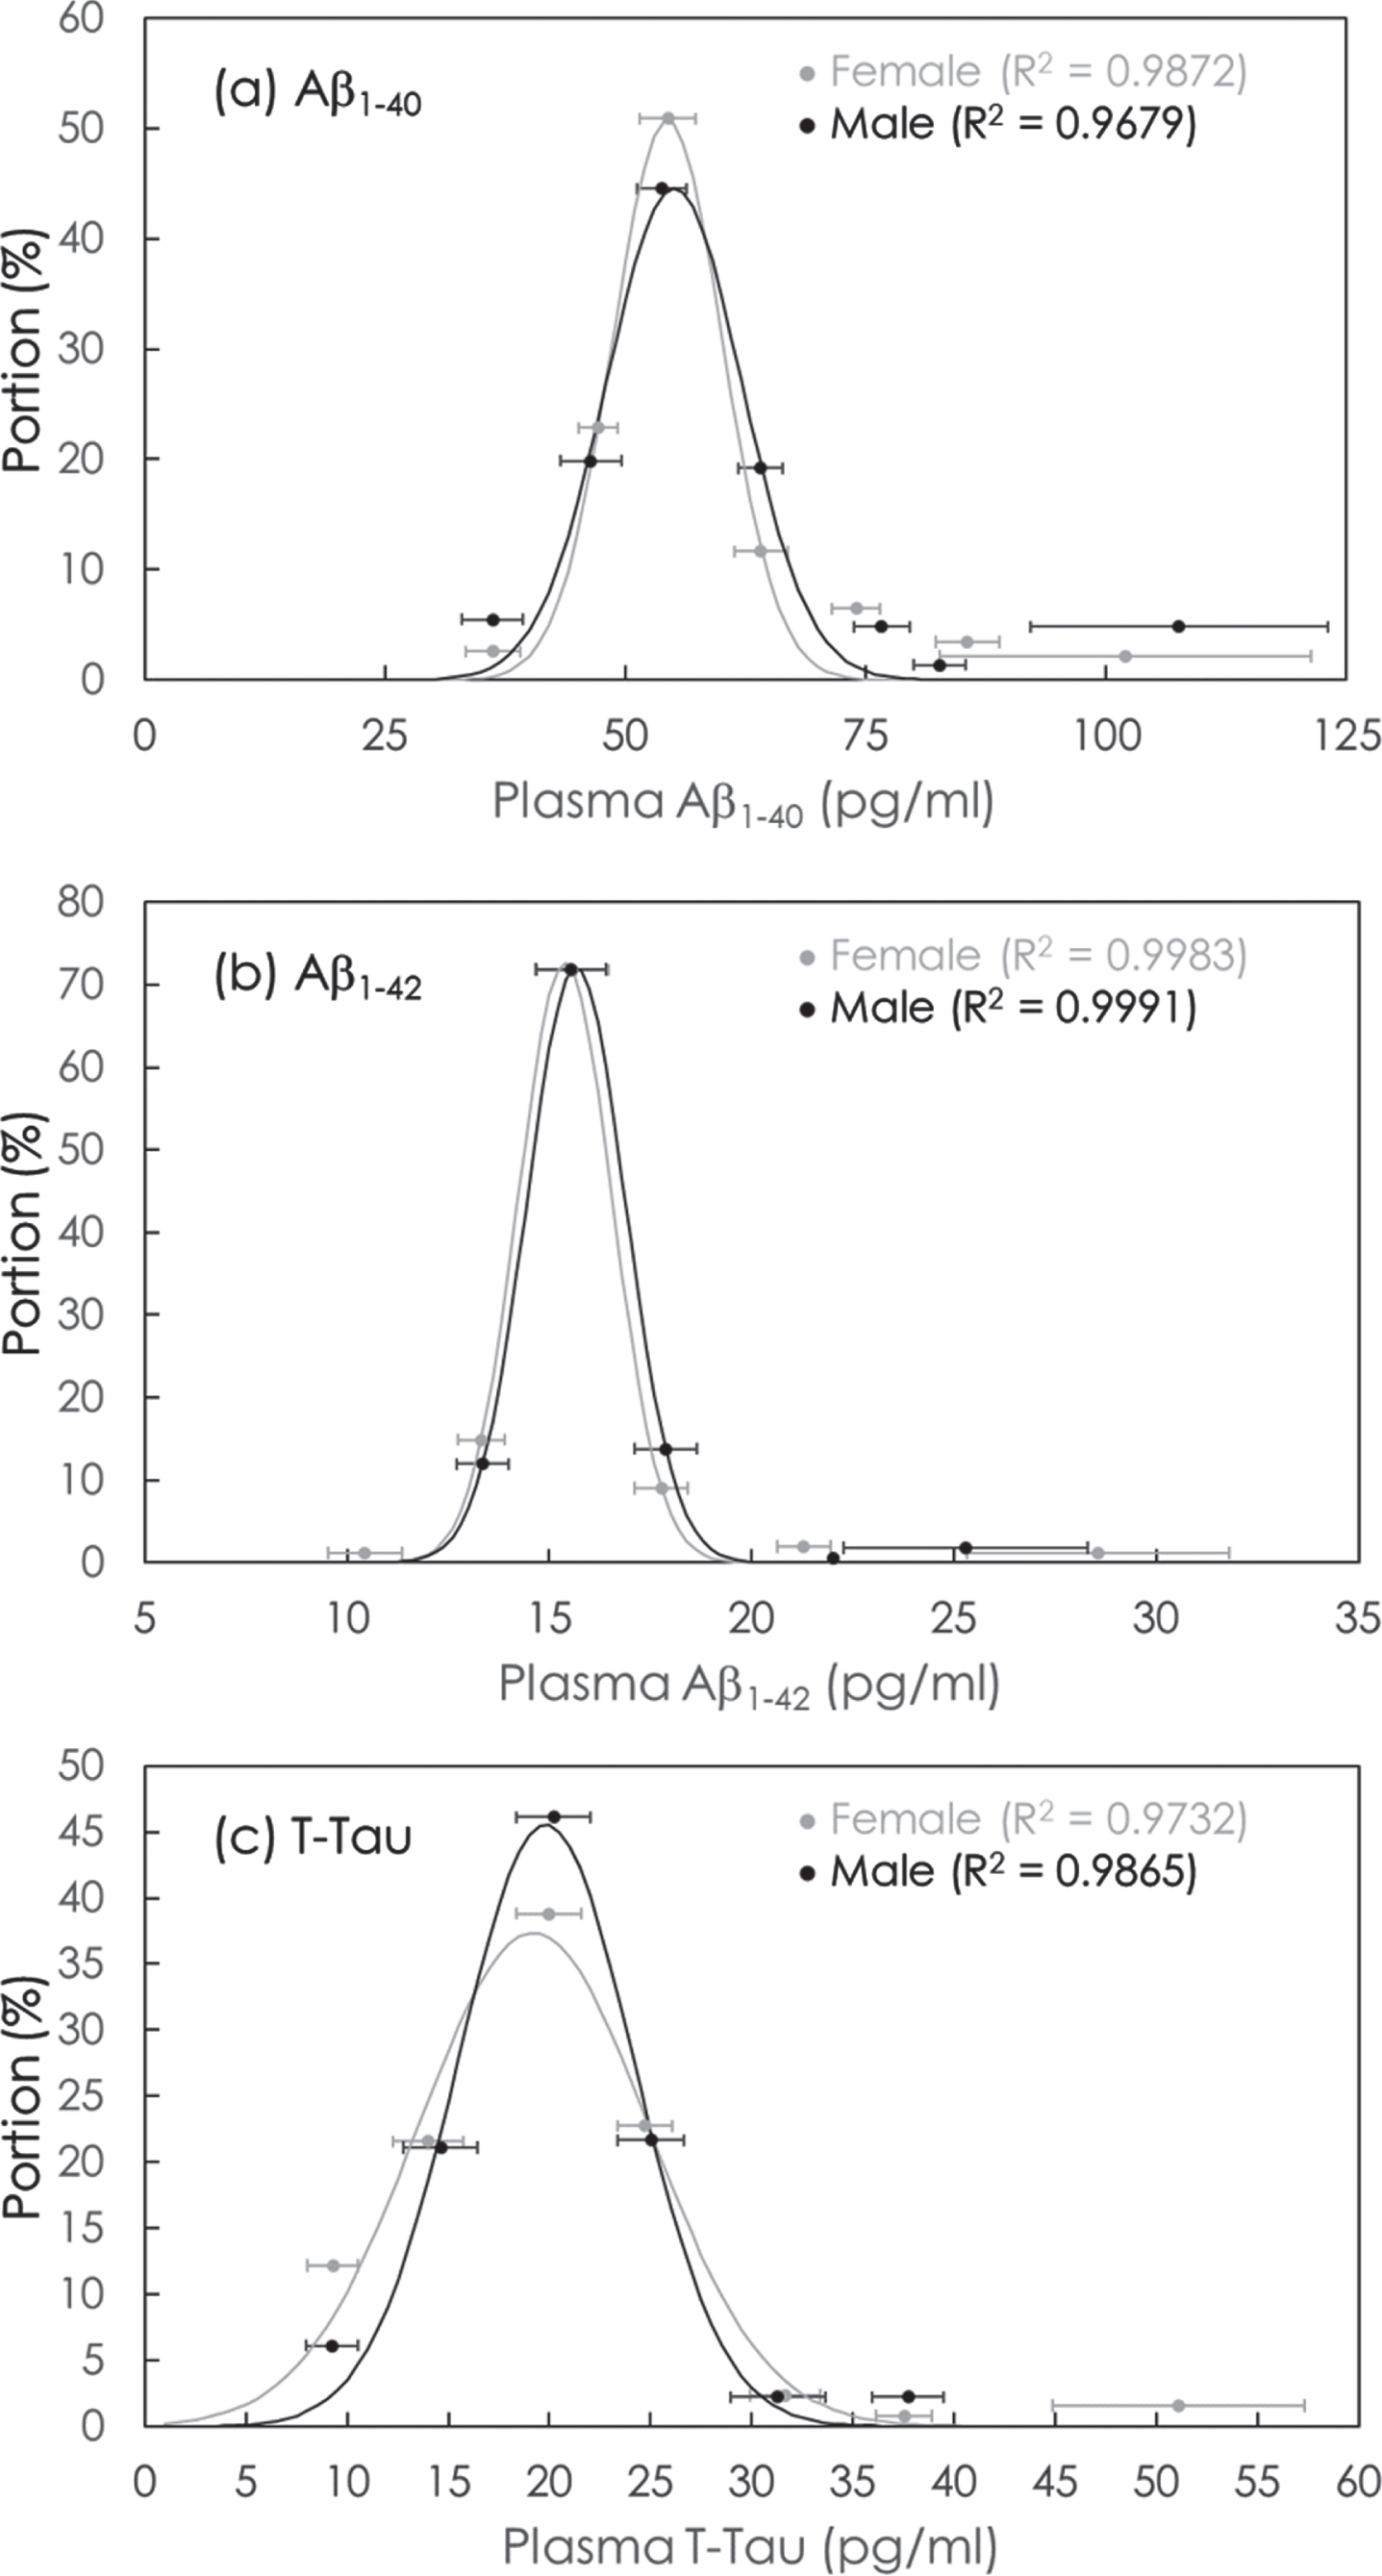 Gaussian distributions of concentrations of (a) Aβ1-40, (b) Aβ1-42, and (c) T-Tau in plasma in cognitively normal subjects. The solid lines are the fitted Equation (1). The values of fitting parameters are shown in Table 3.